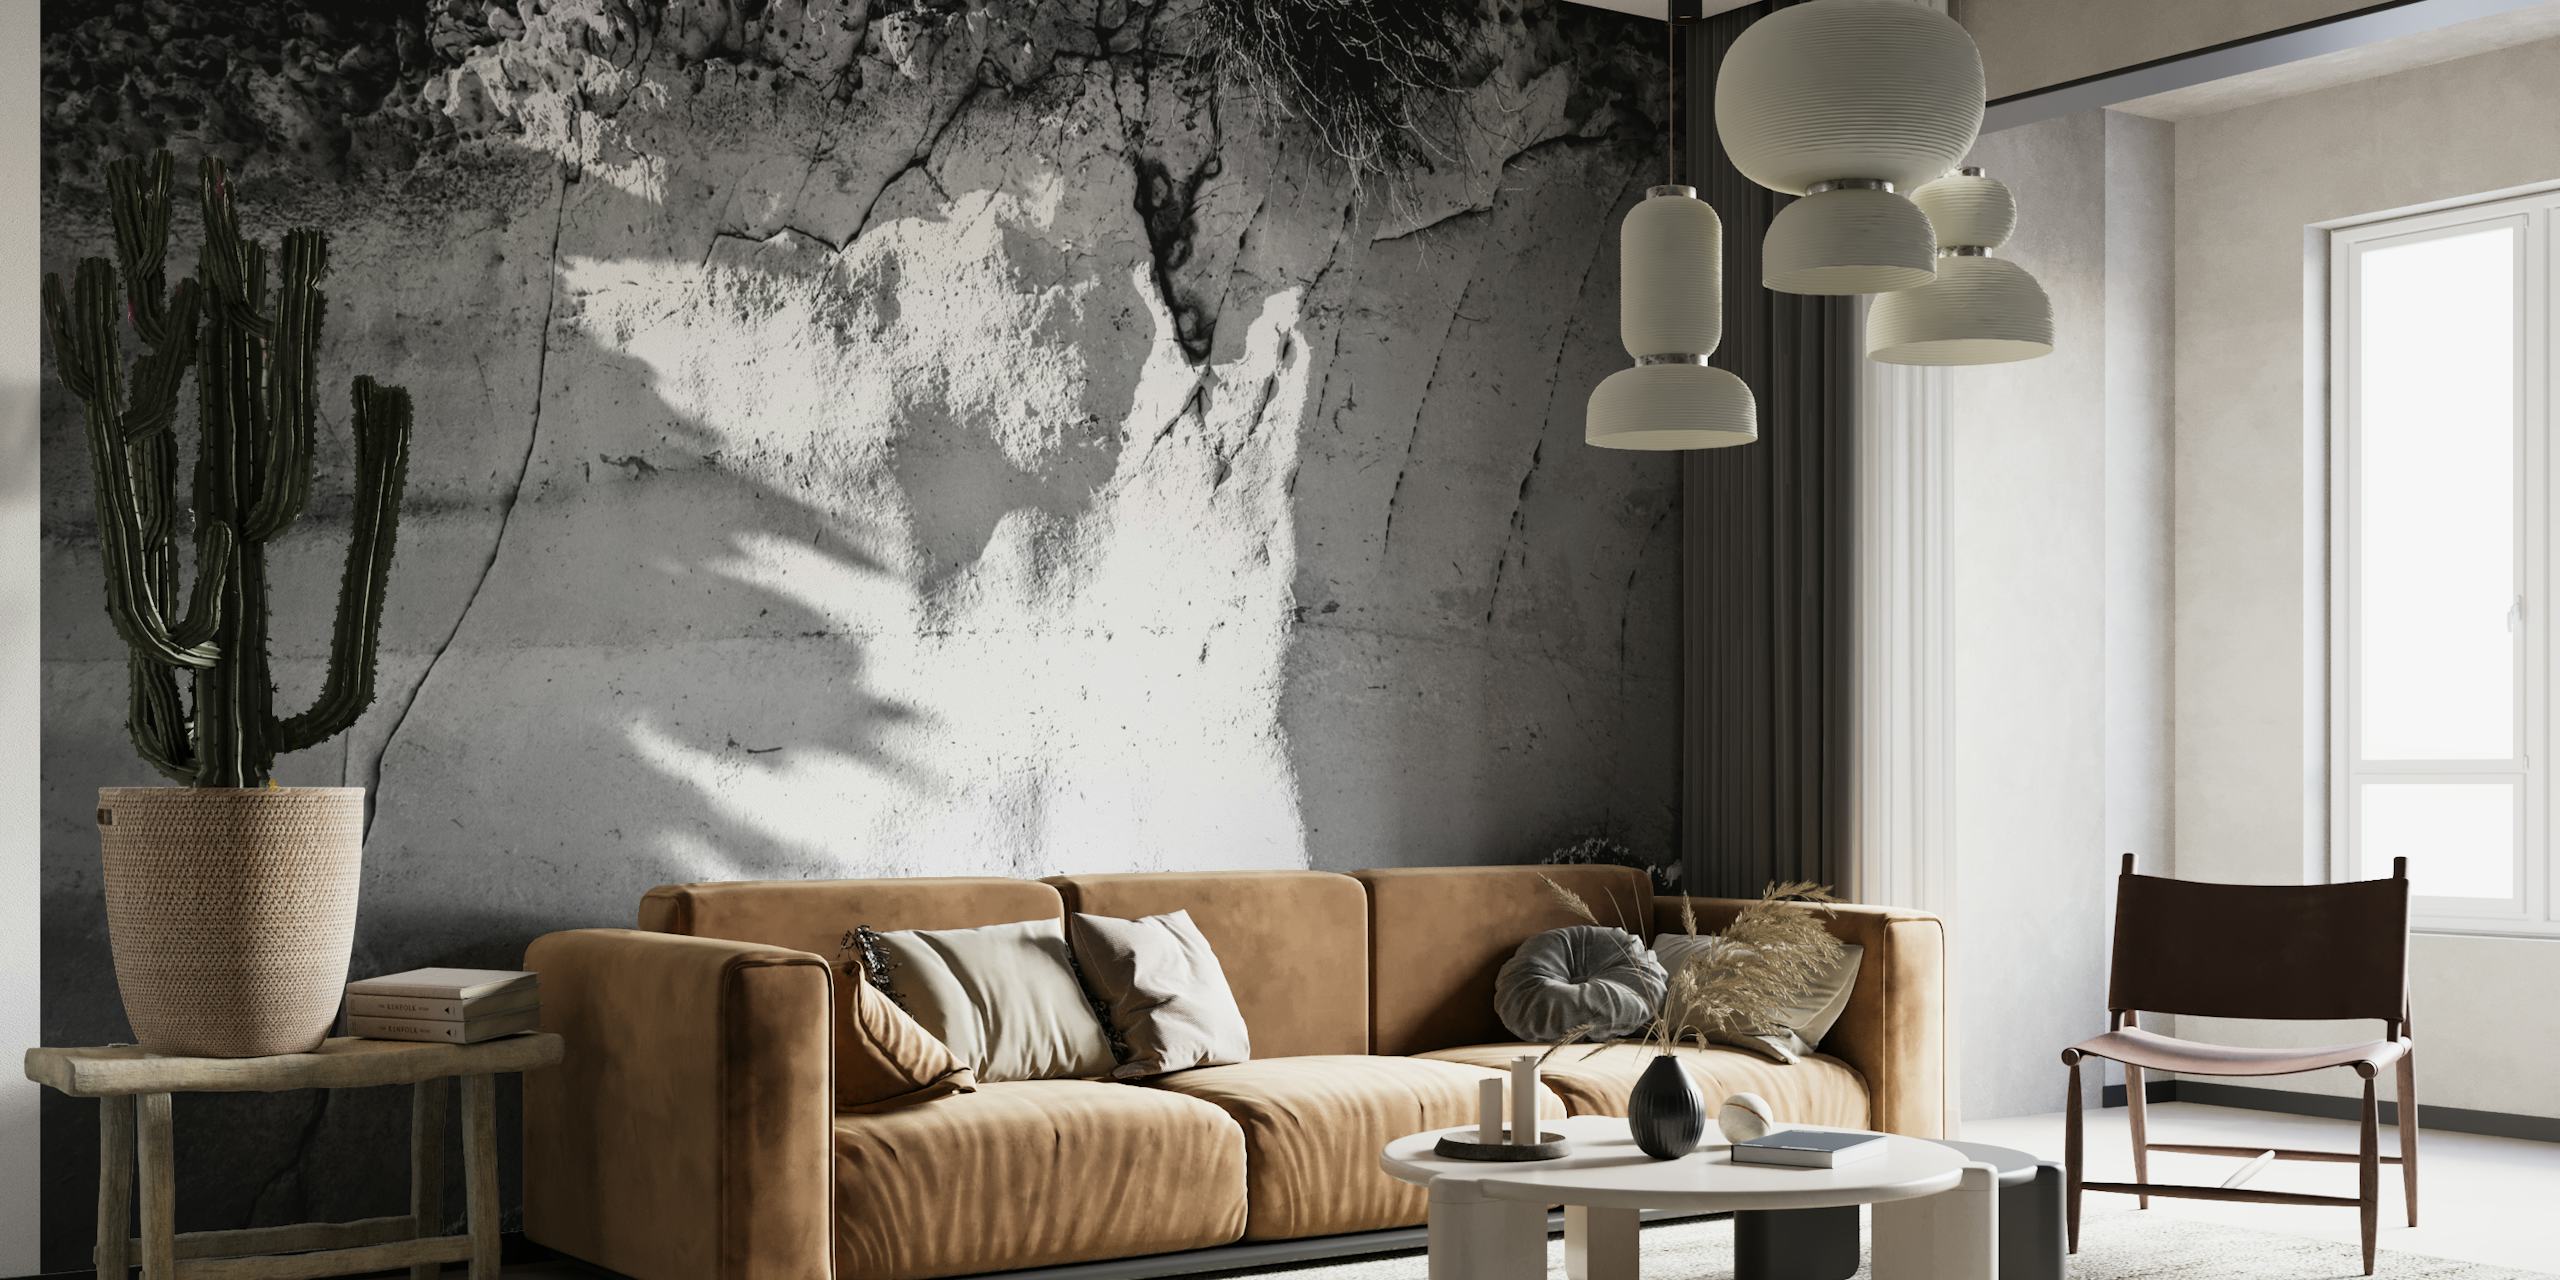 Black and white abstract minimalistic wall mural design from Traces 18 BW Mono Minimal Art collection